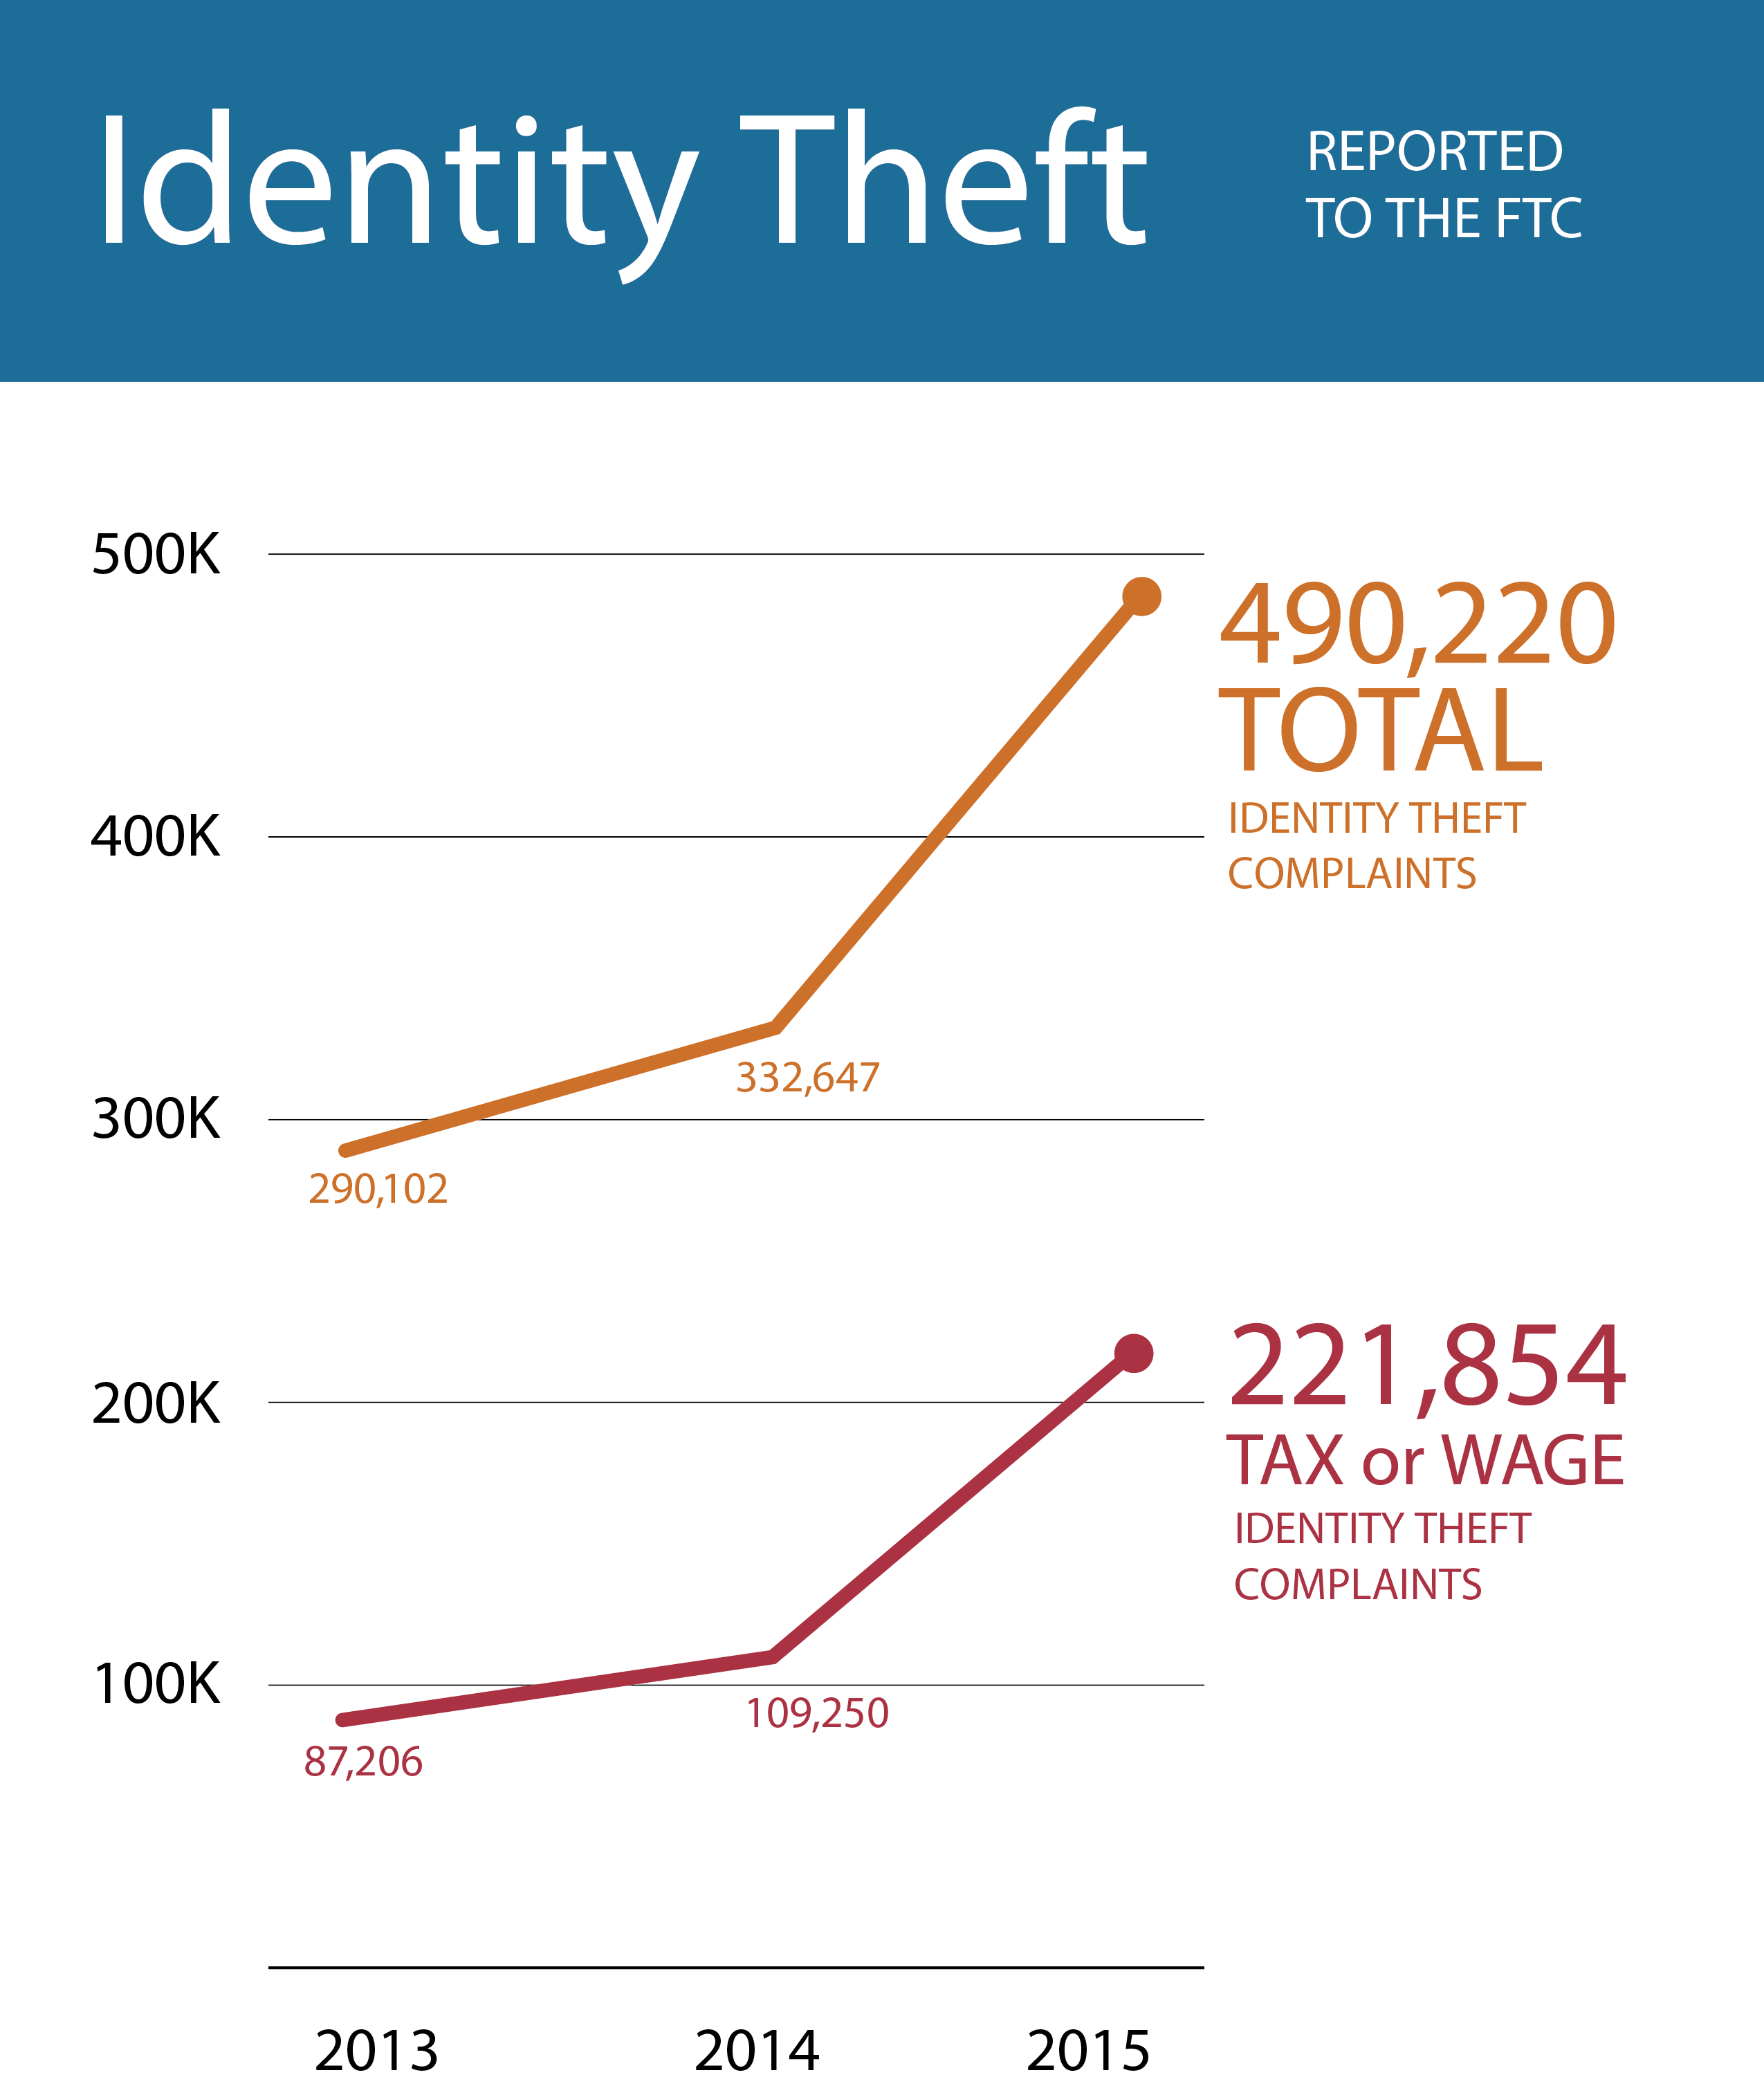 Identity Theft Complaints Rose by 47% from 2014 to 2015